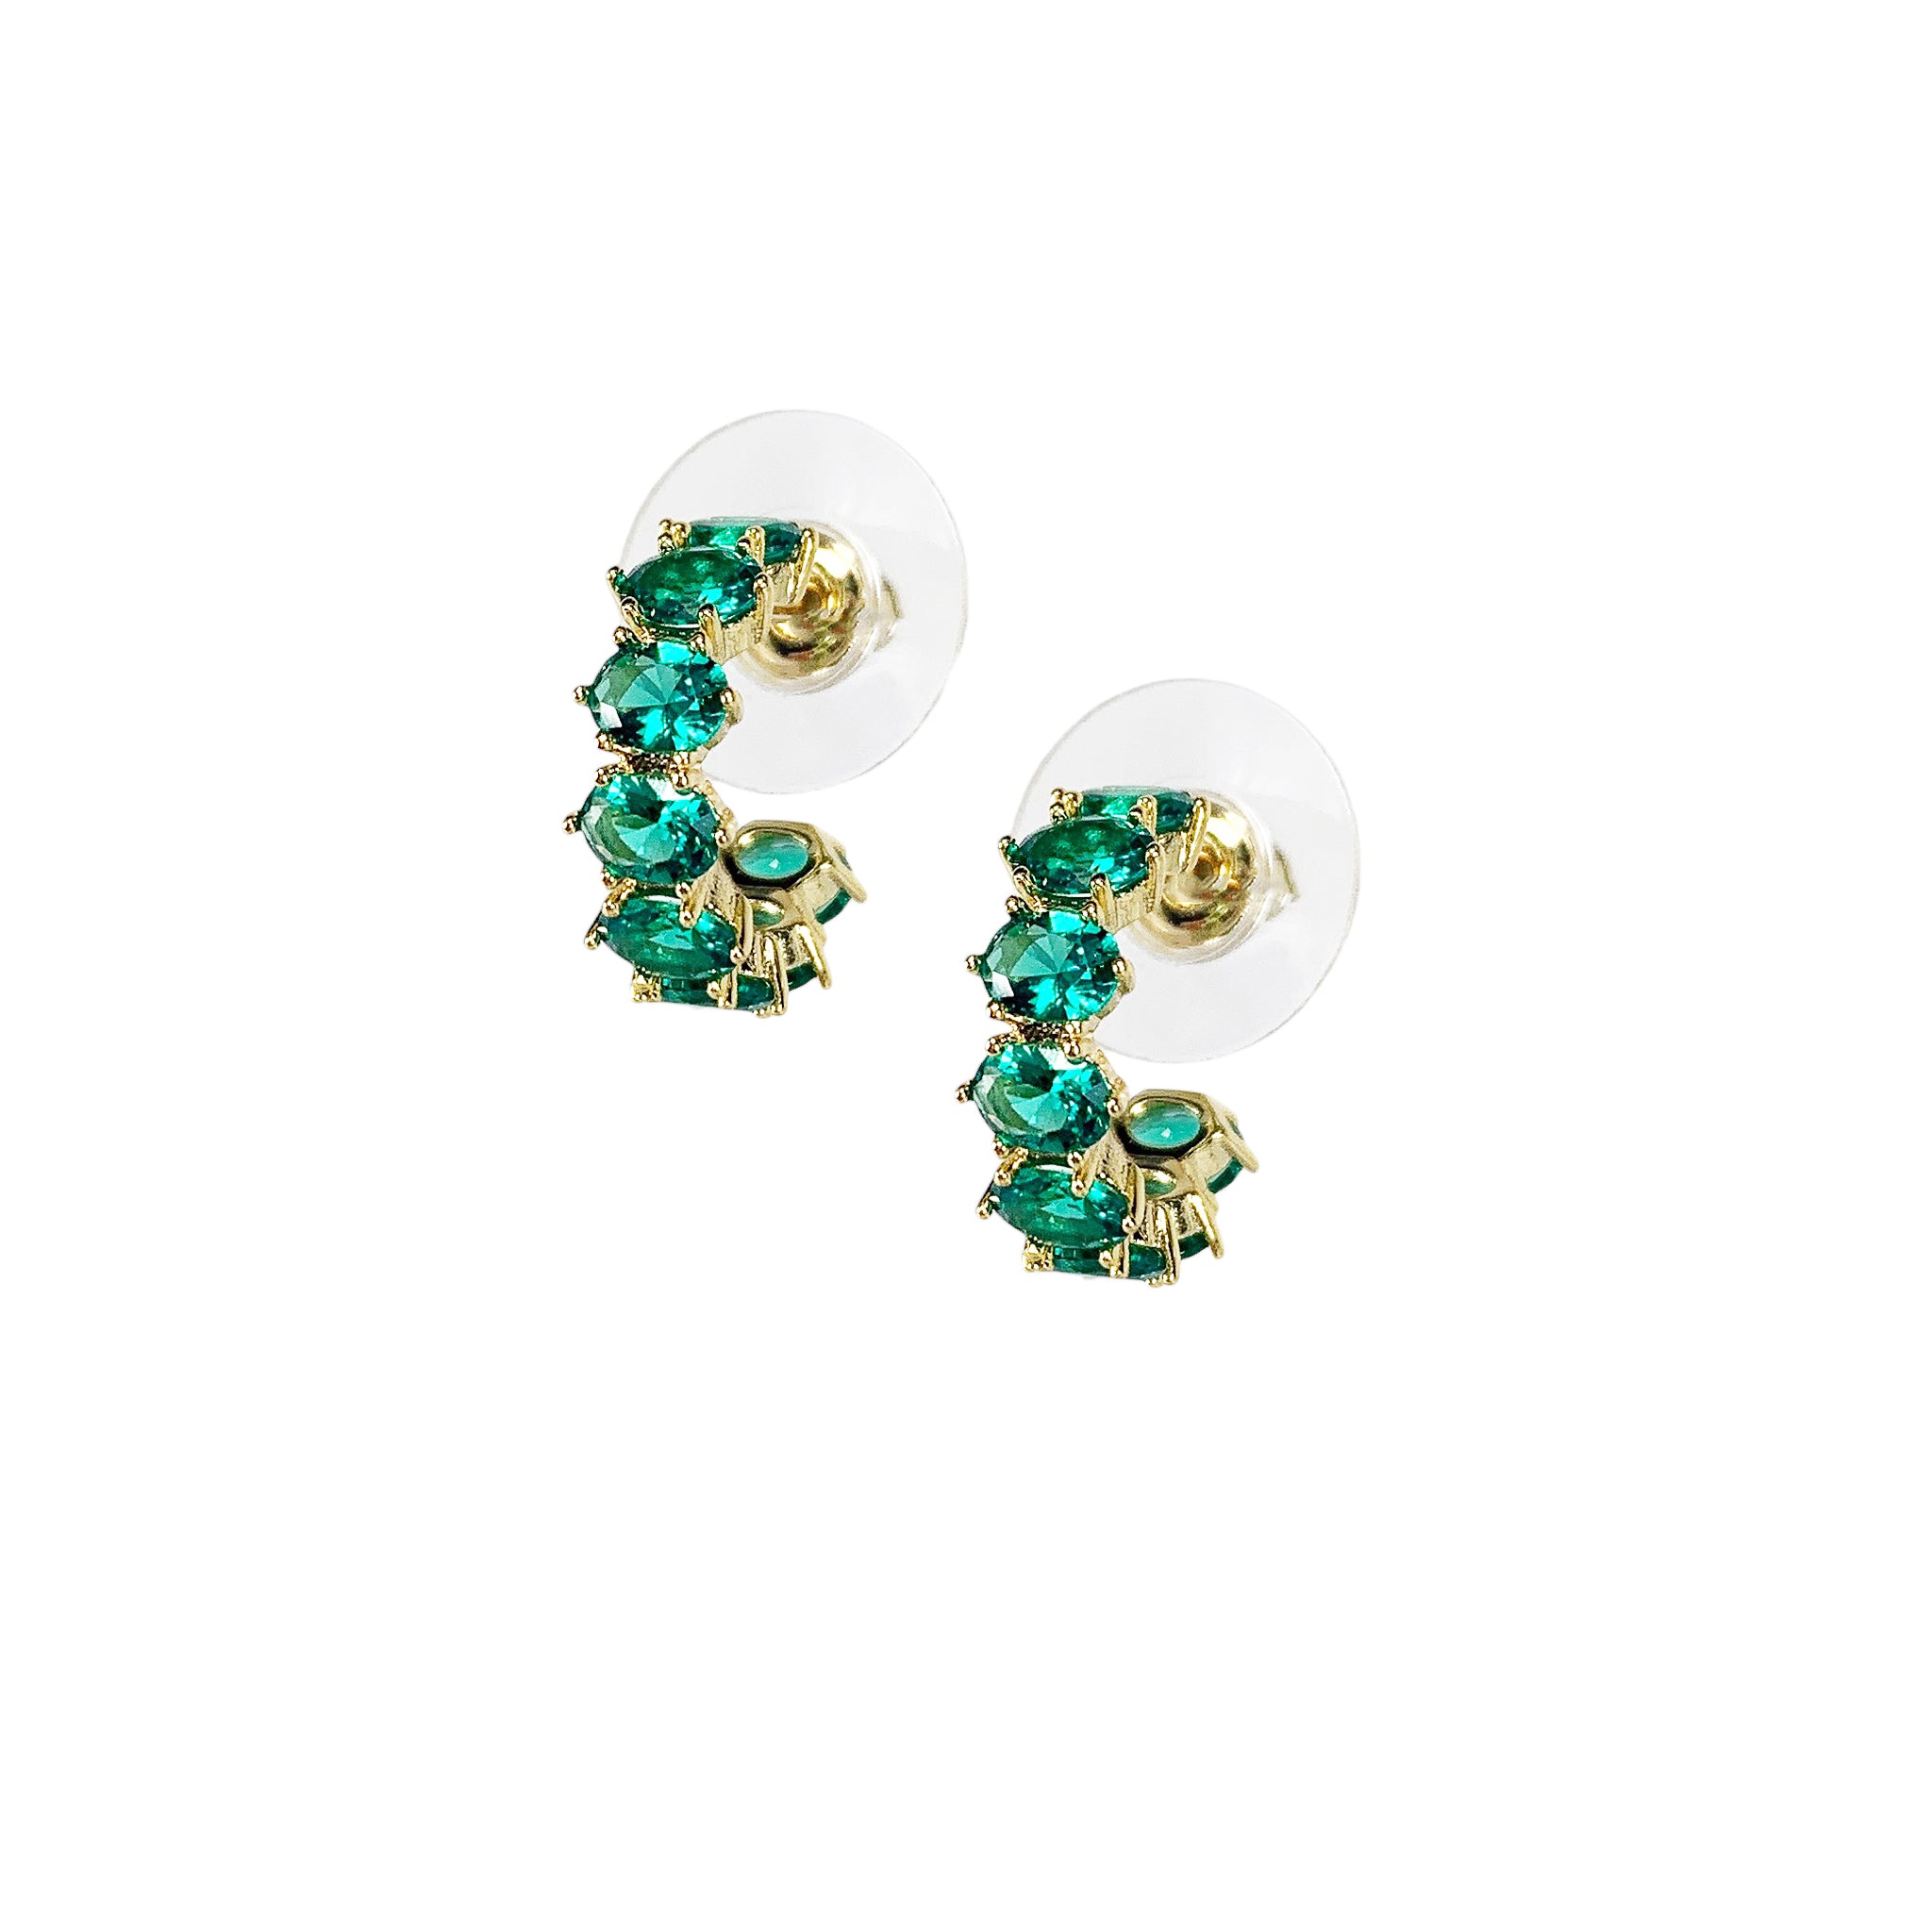 Kendra Scott Cailin Huggie Hoop Earrings in Green Crystal and Gold Plated